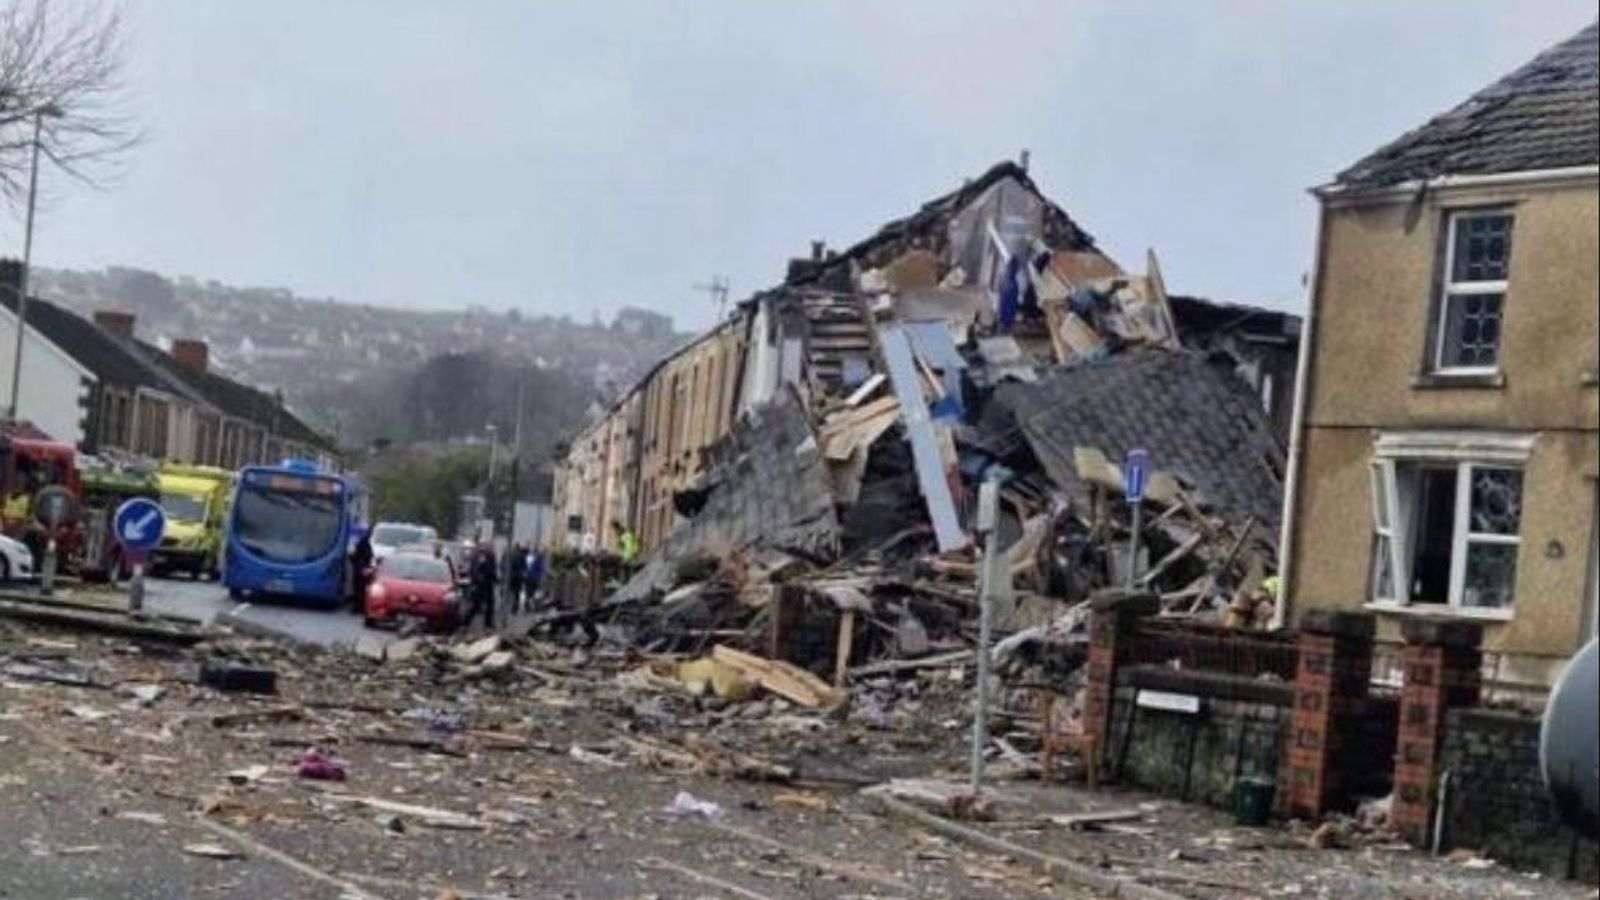 One dead and three in hospital after suspected gas explosion in Swansea